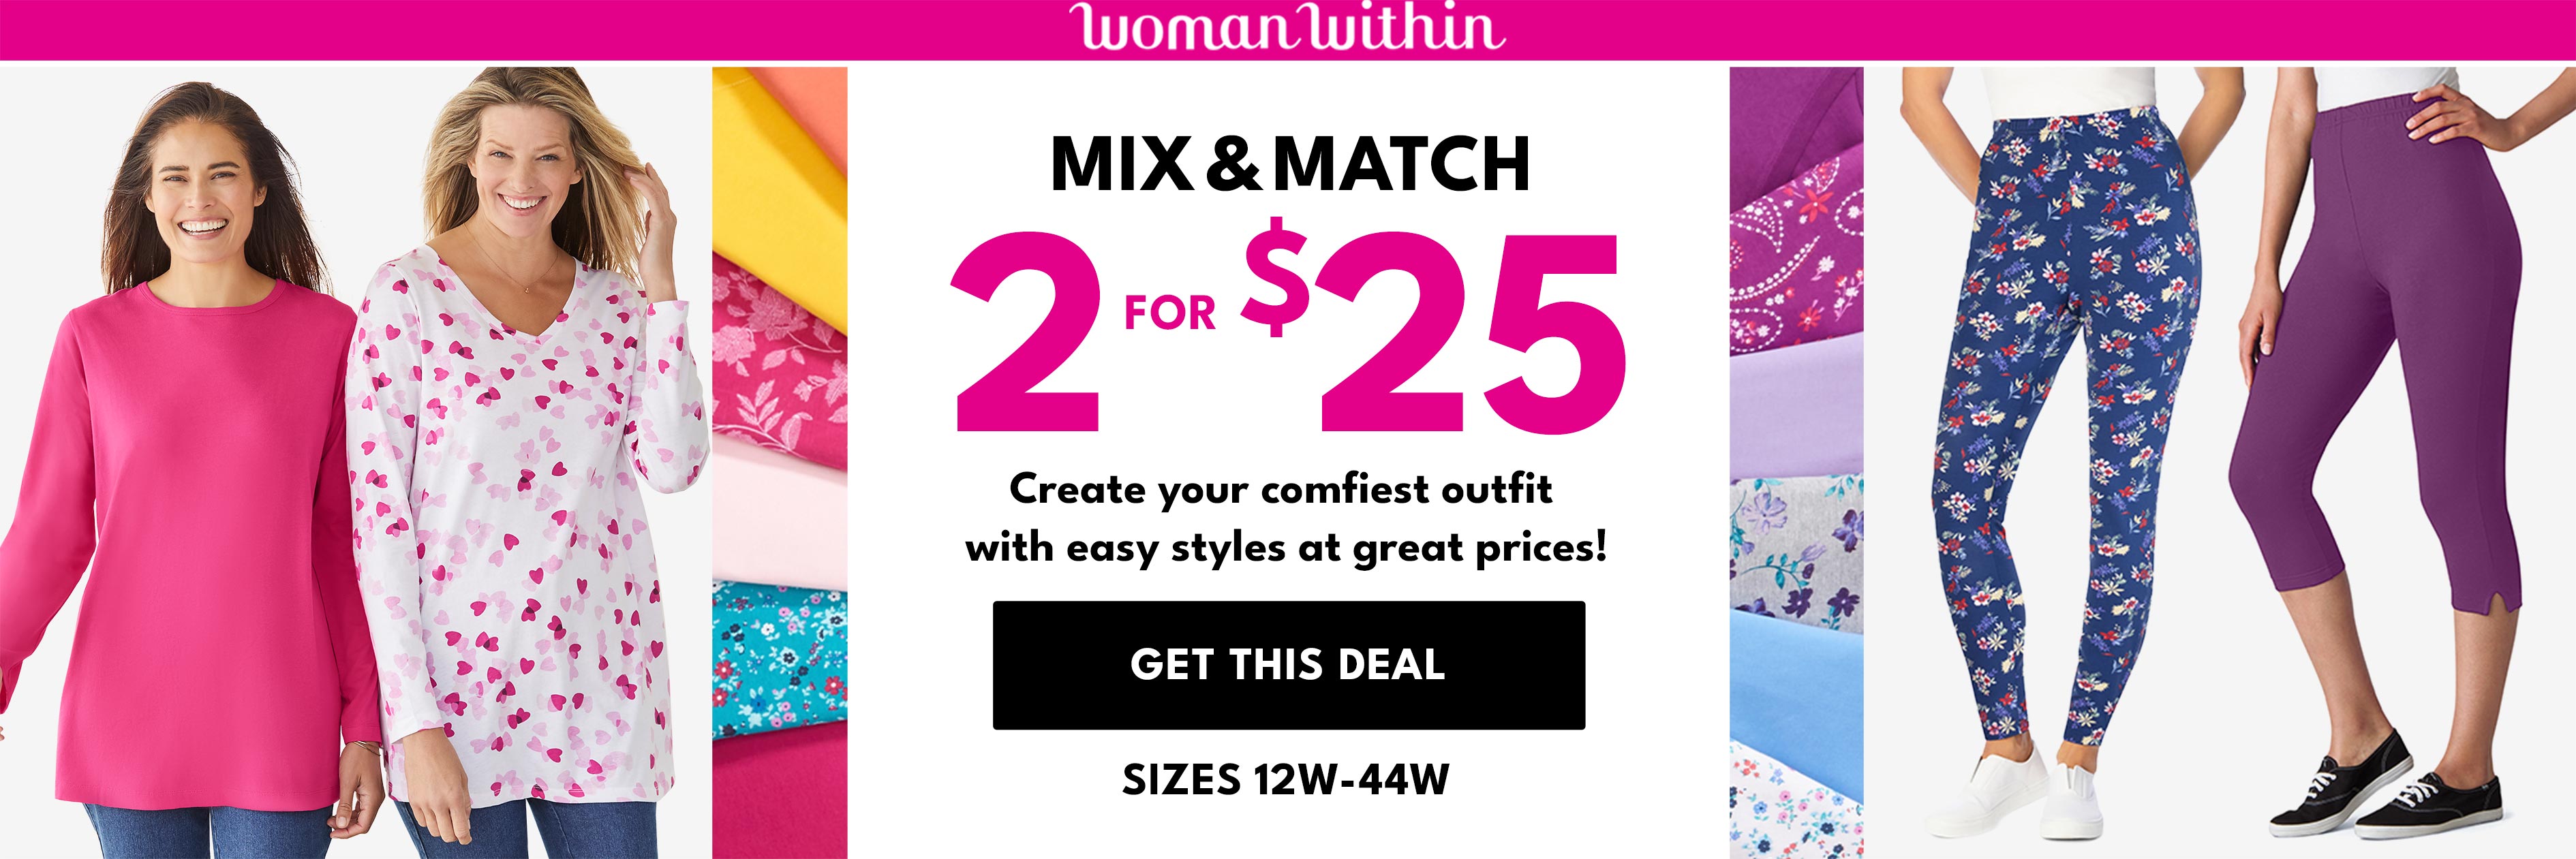 Mix & Match 2 for $25 get this deal